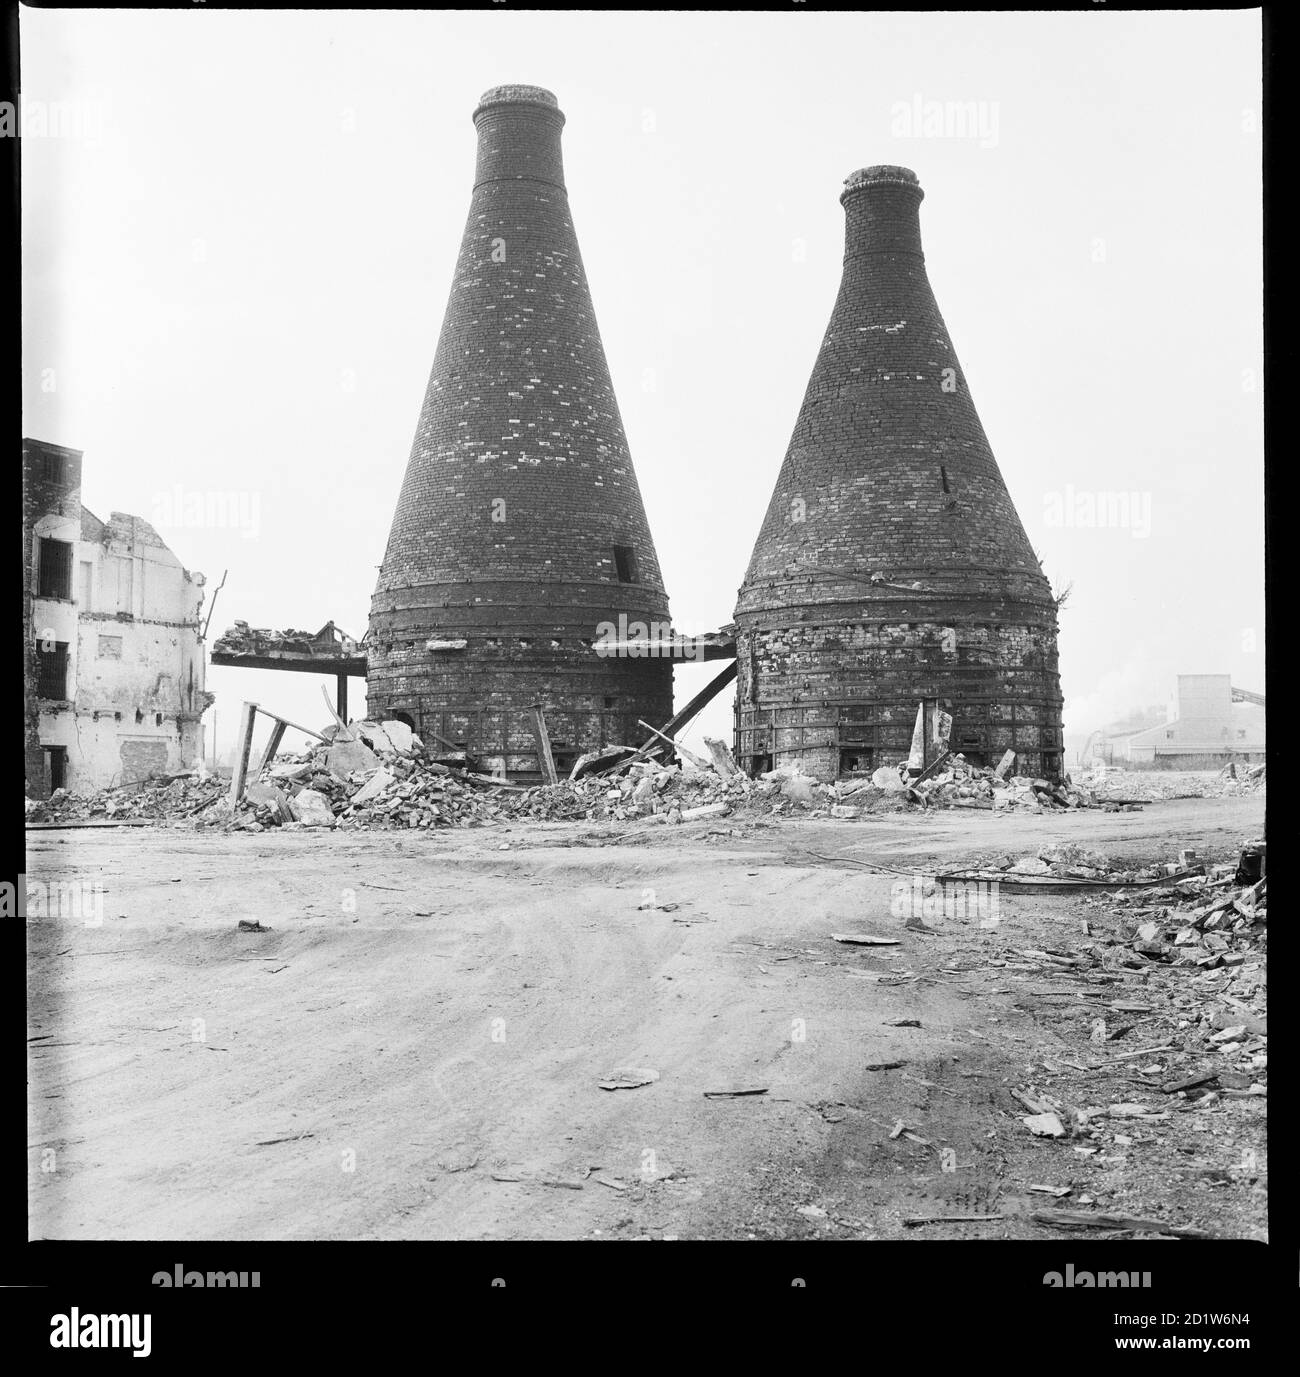 Two bottle kilns standing amidst the debris of the Josiah Wedgwood's Etruria Pottery Works during demolition, Etruria Road, Etruria, Stoke-on-Trent, Staffordshire, UK. Stock Photo